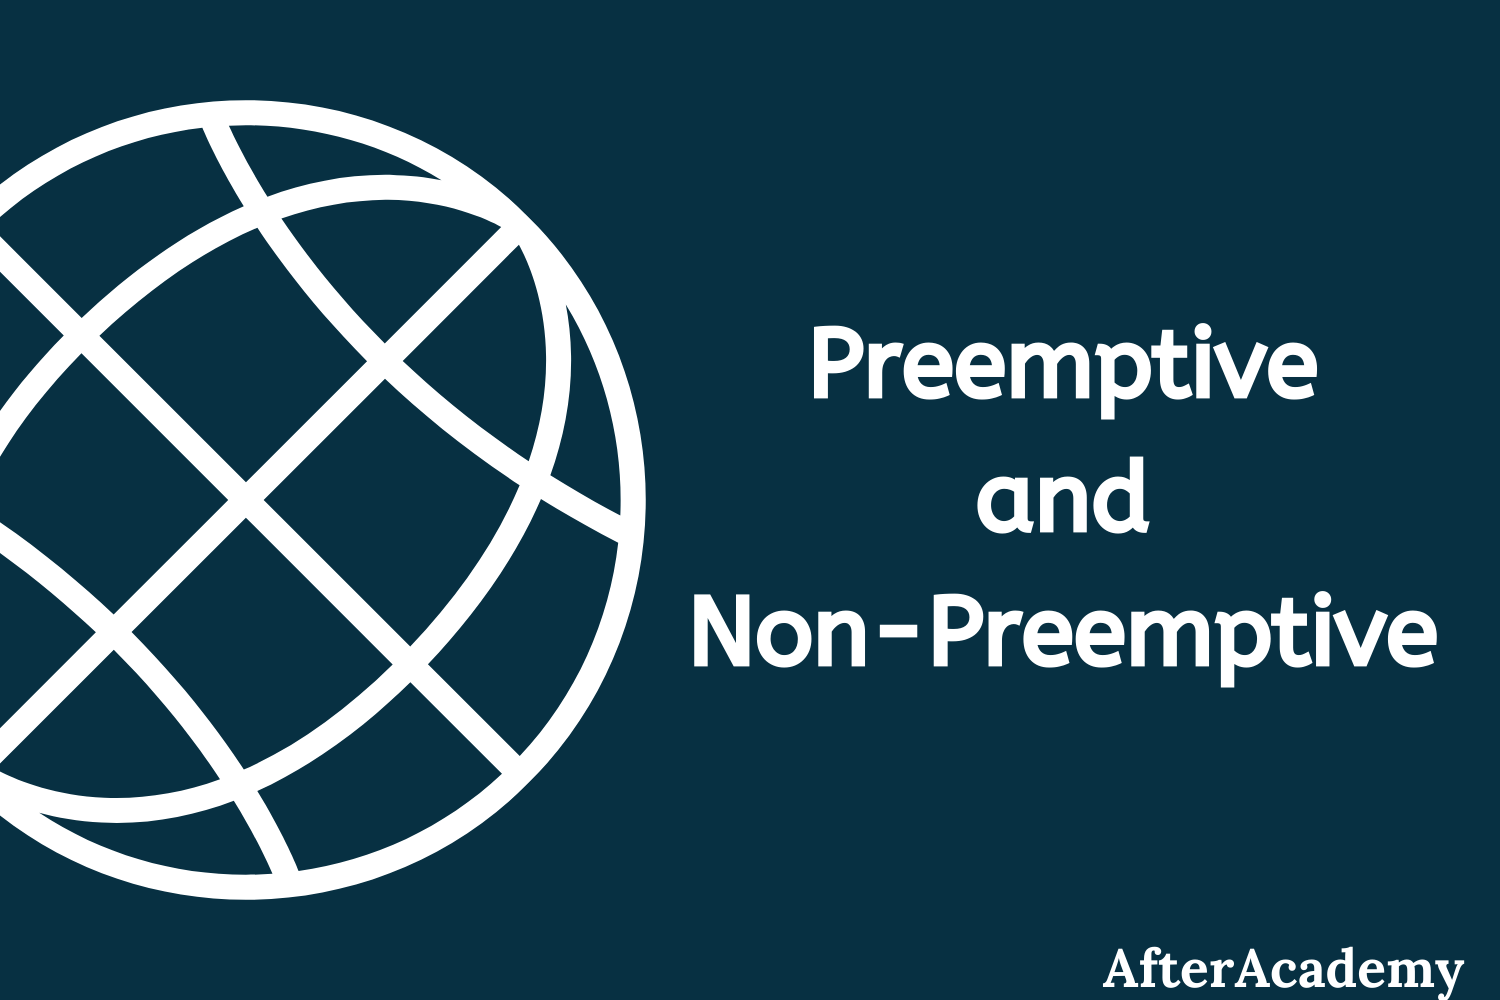 What is the difference between Preemptive and Non-Preemptive scheduling?